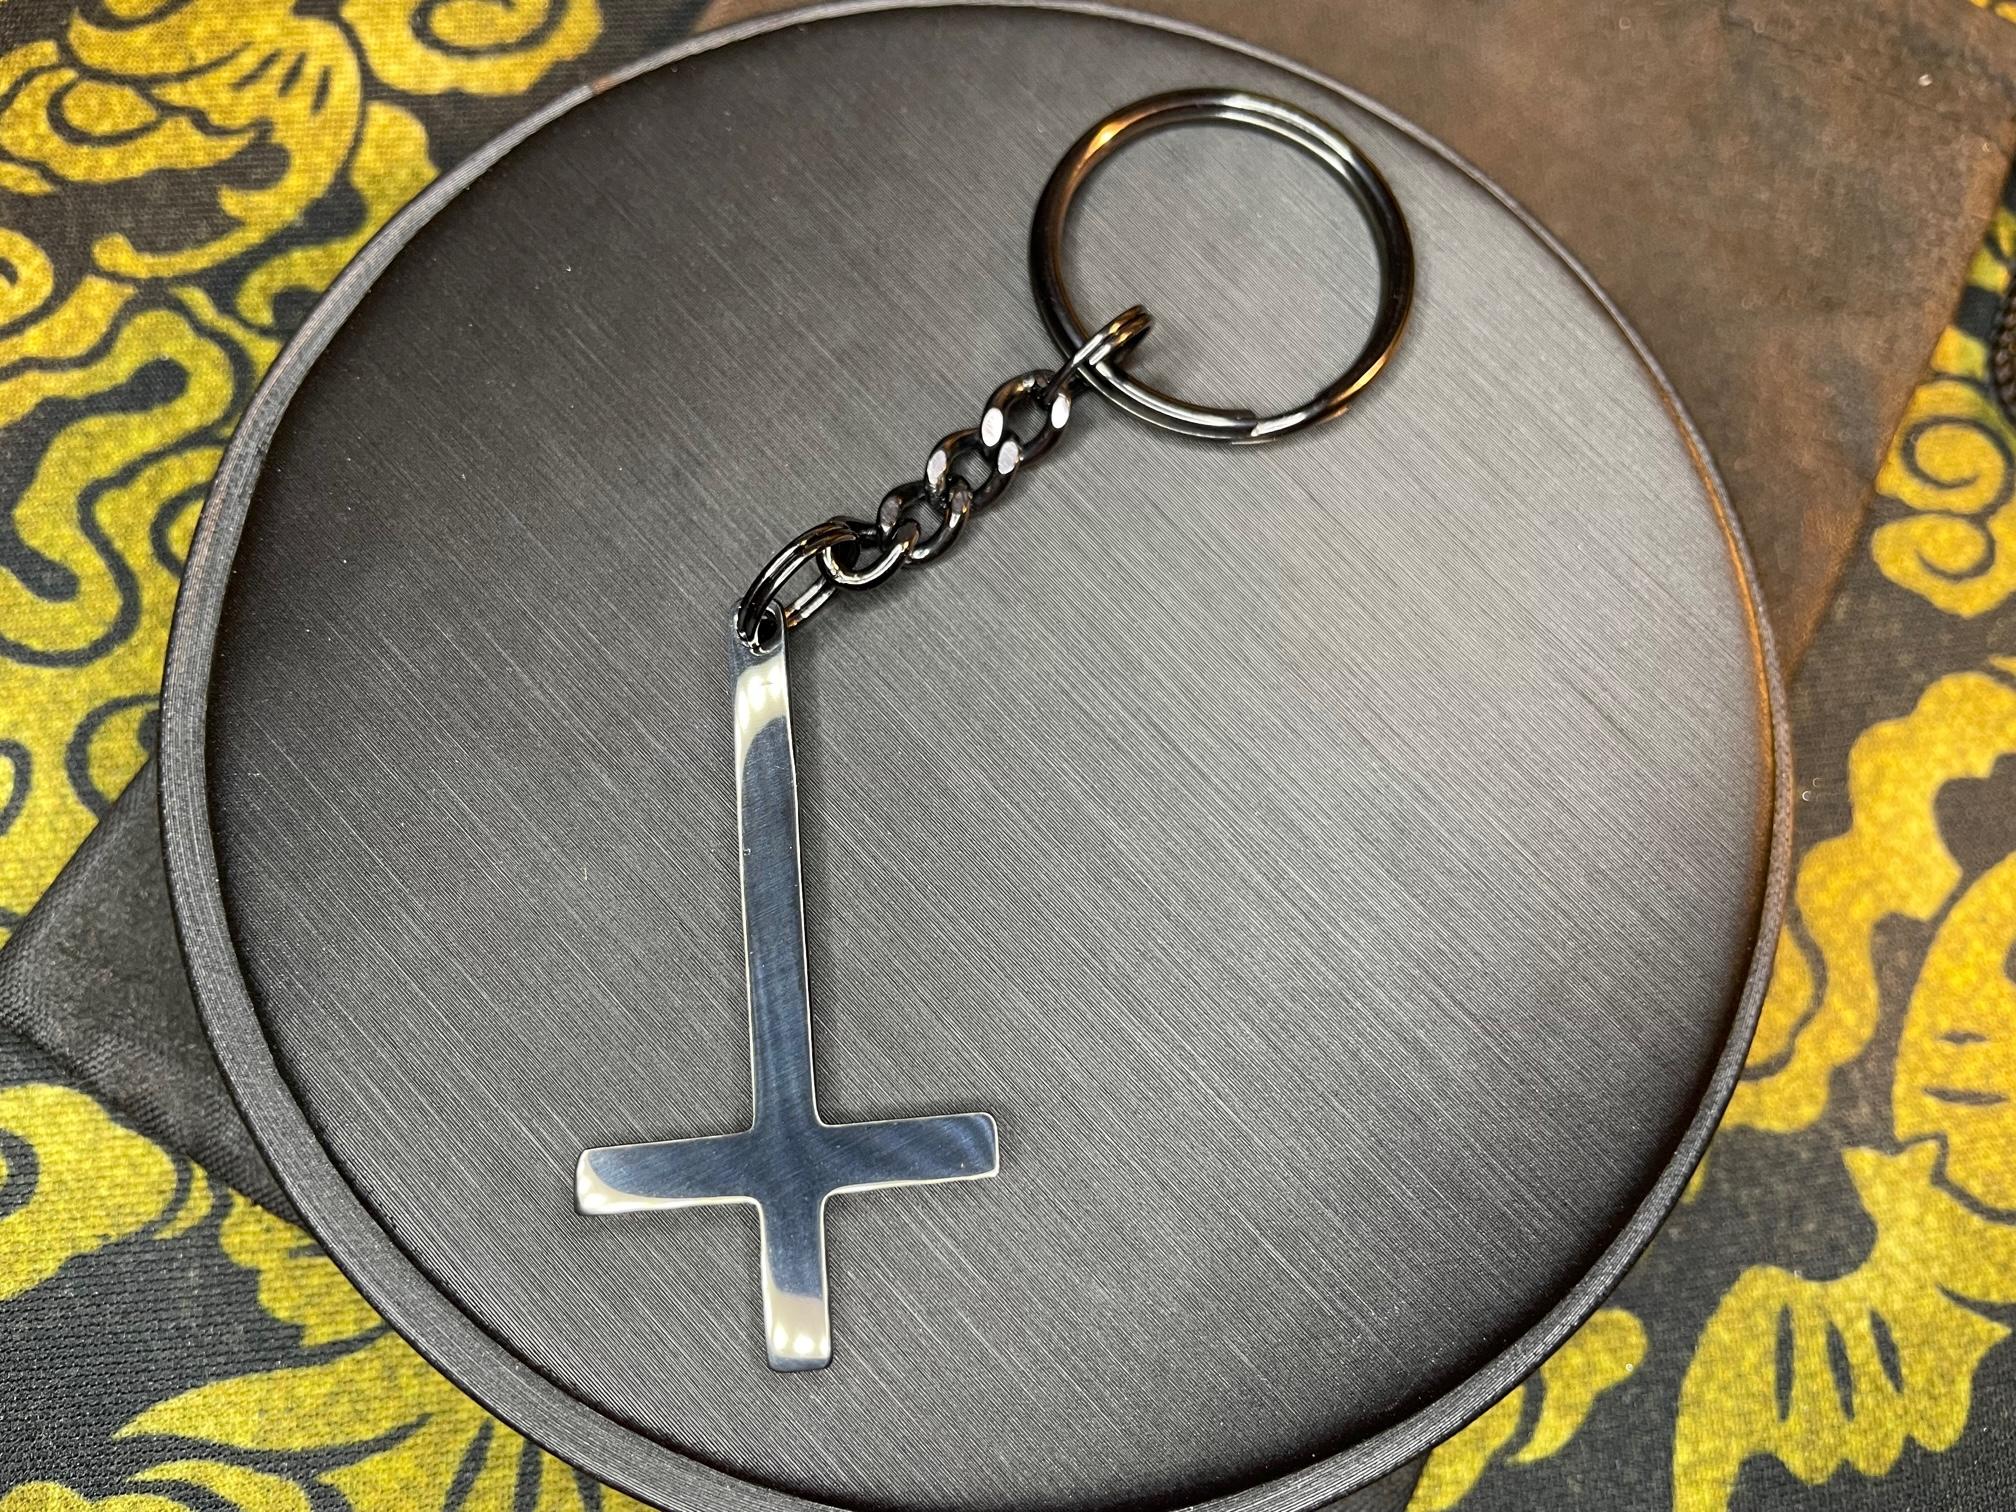 upside down inverted cross stainless steel pendant keychain gothic minimalist retro satanic wiccan occult darkness jewelry black